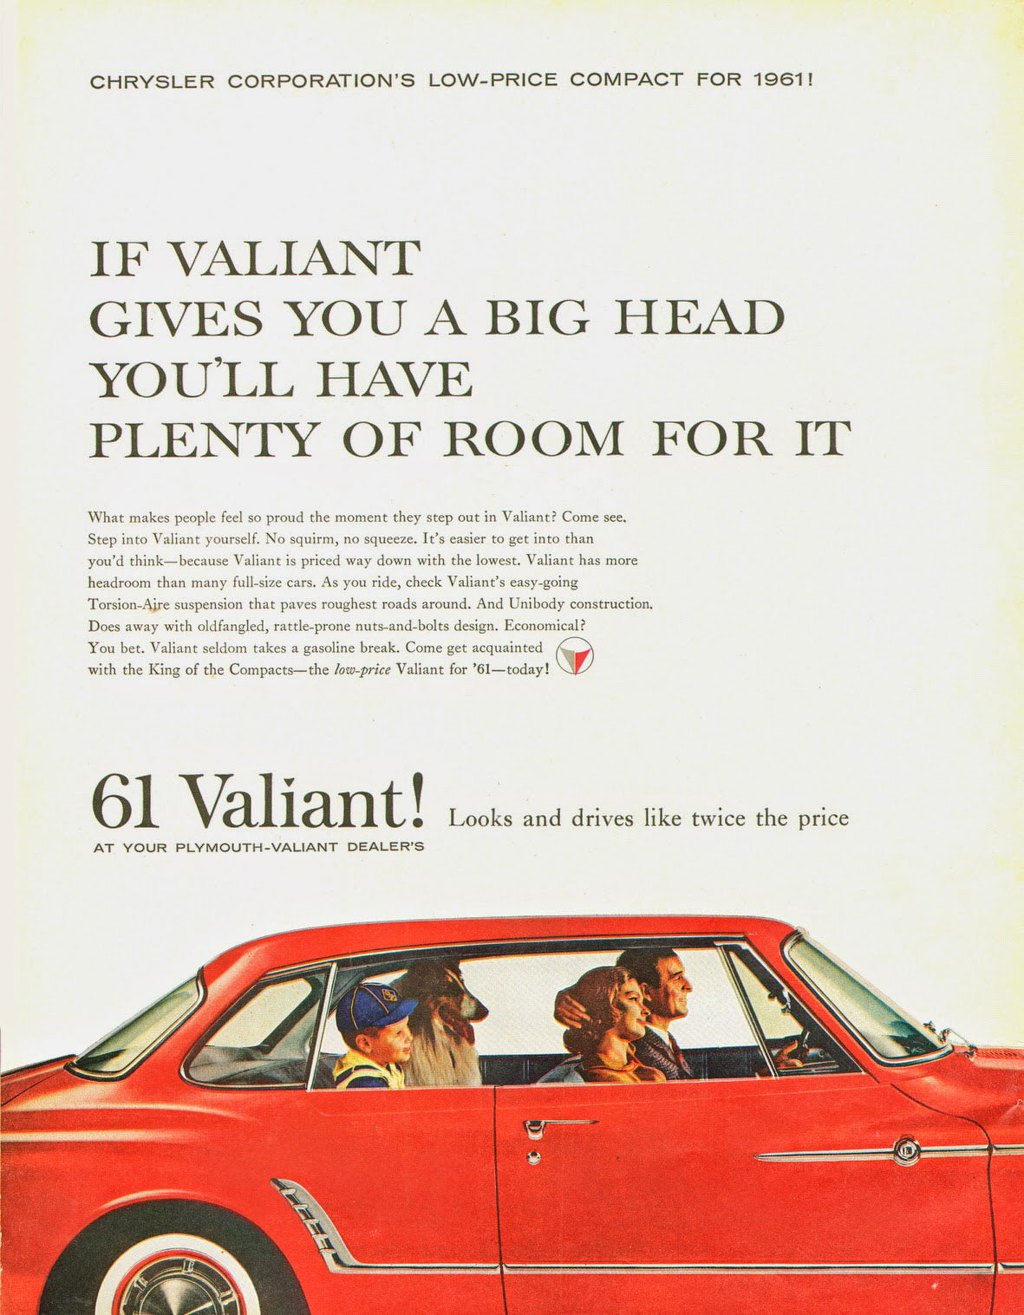 CHRYSLER CORPORATION'S LOW-PRICE COMPACT FOR 1961! 
IF VALIANT GIVES YOU A BIG HEAD YOU'LL HAVE PLENTY OF ROOM FOR IT 
What makes people feel so proud the moment they step out in Valiant? Come see. Step into Valiant yourself. No squirrn, no squeeze. It's easier to get into than you'd think—because Valiant is priced way down with the lowest. Valiant has more headroom than many full-size cars. As you ride, check Valiant's easy-going Torsion-Aire suspension that paves roughest roads around. And Unibody construction. Does away with oldfangled, rattle-prone nuts-and-bolts design. Economical? You bet. Valiant seldom takes a gasoline break. Come get acquainted (4) with the King of the Compacts—the low-price Valiant for '61—today! 
61 Valiant! Looks and drives like twice the price 
AT YOUR PLYMOUTH-VALIANT DEALER'S 
